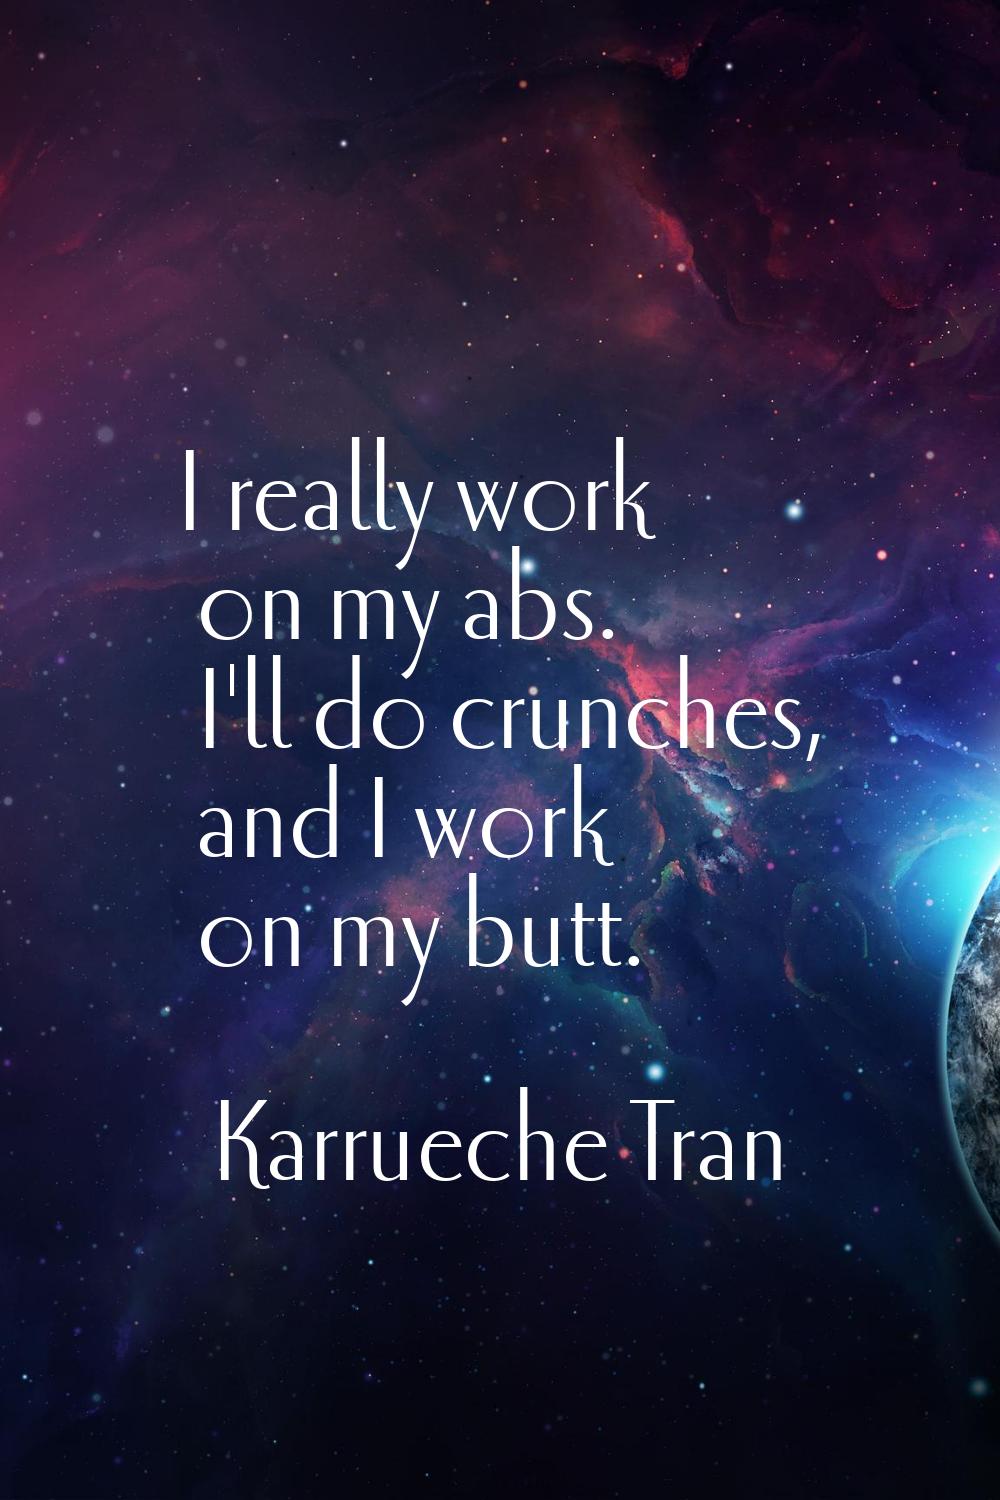 I really work on my abs. I'll do crunches, and I work on my butt.